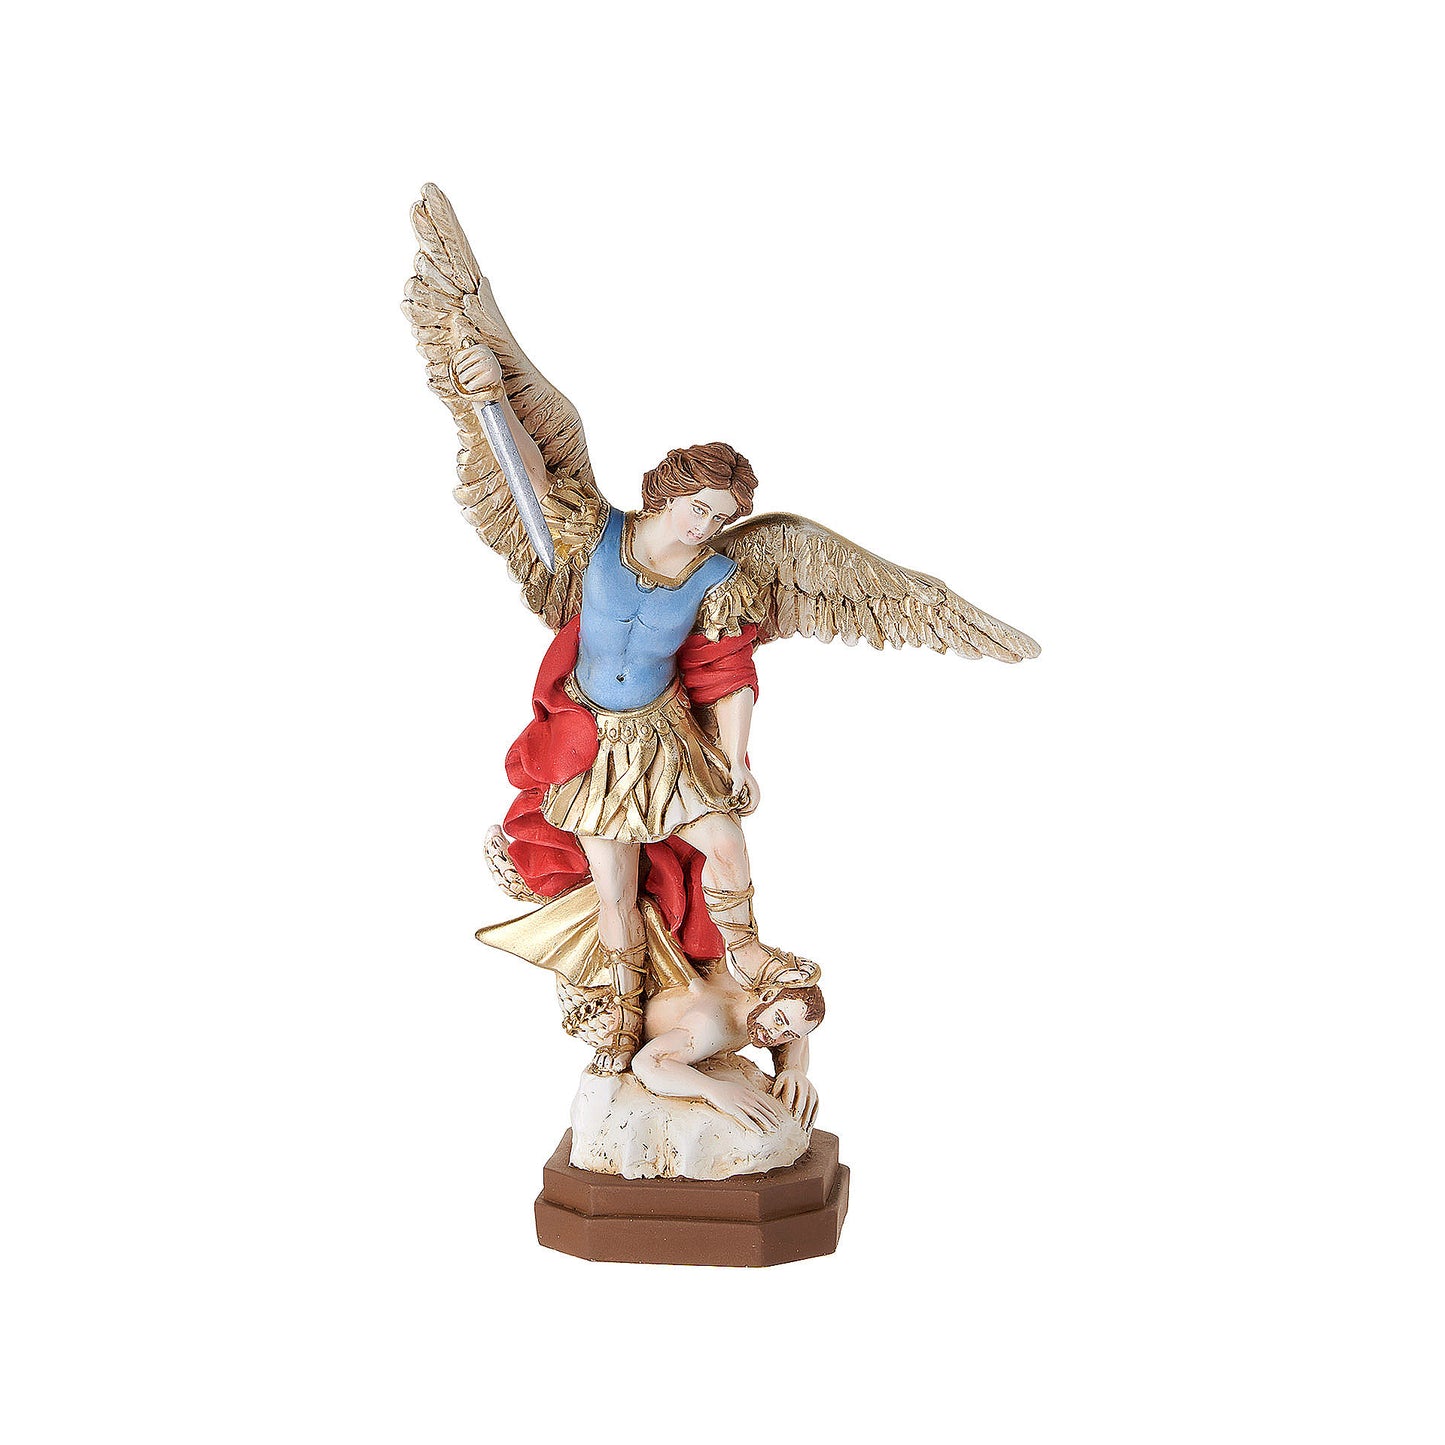 Colored resin St. Michael the Archangel Statue 13 inches